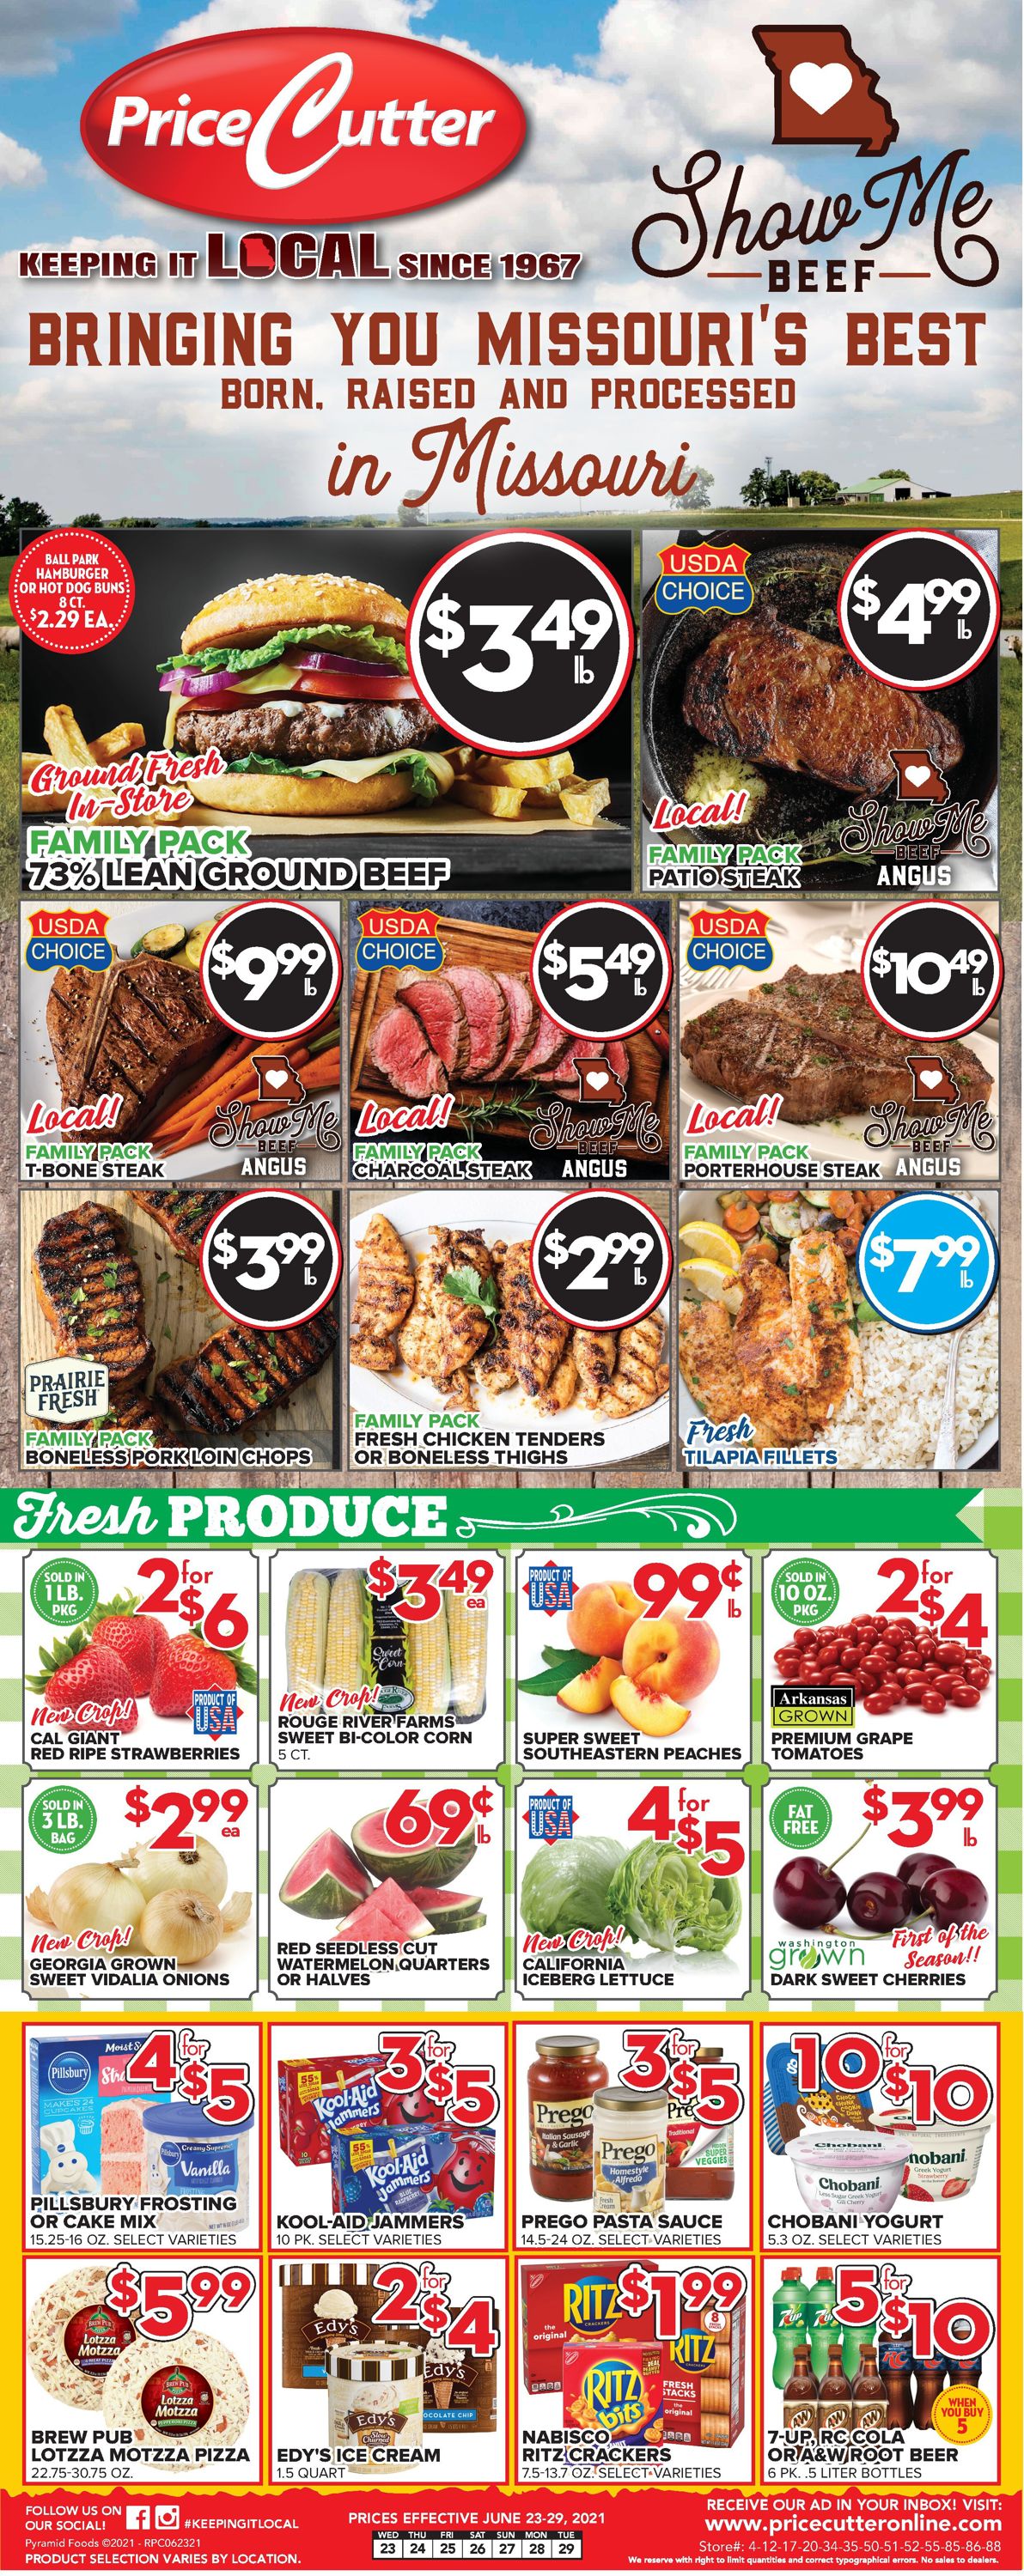 Price Cutter Weekly Ad Circular - valid 06/23-06/29/2021